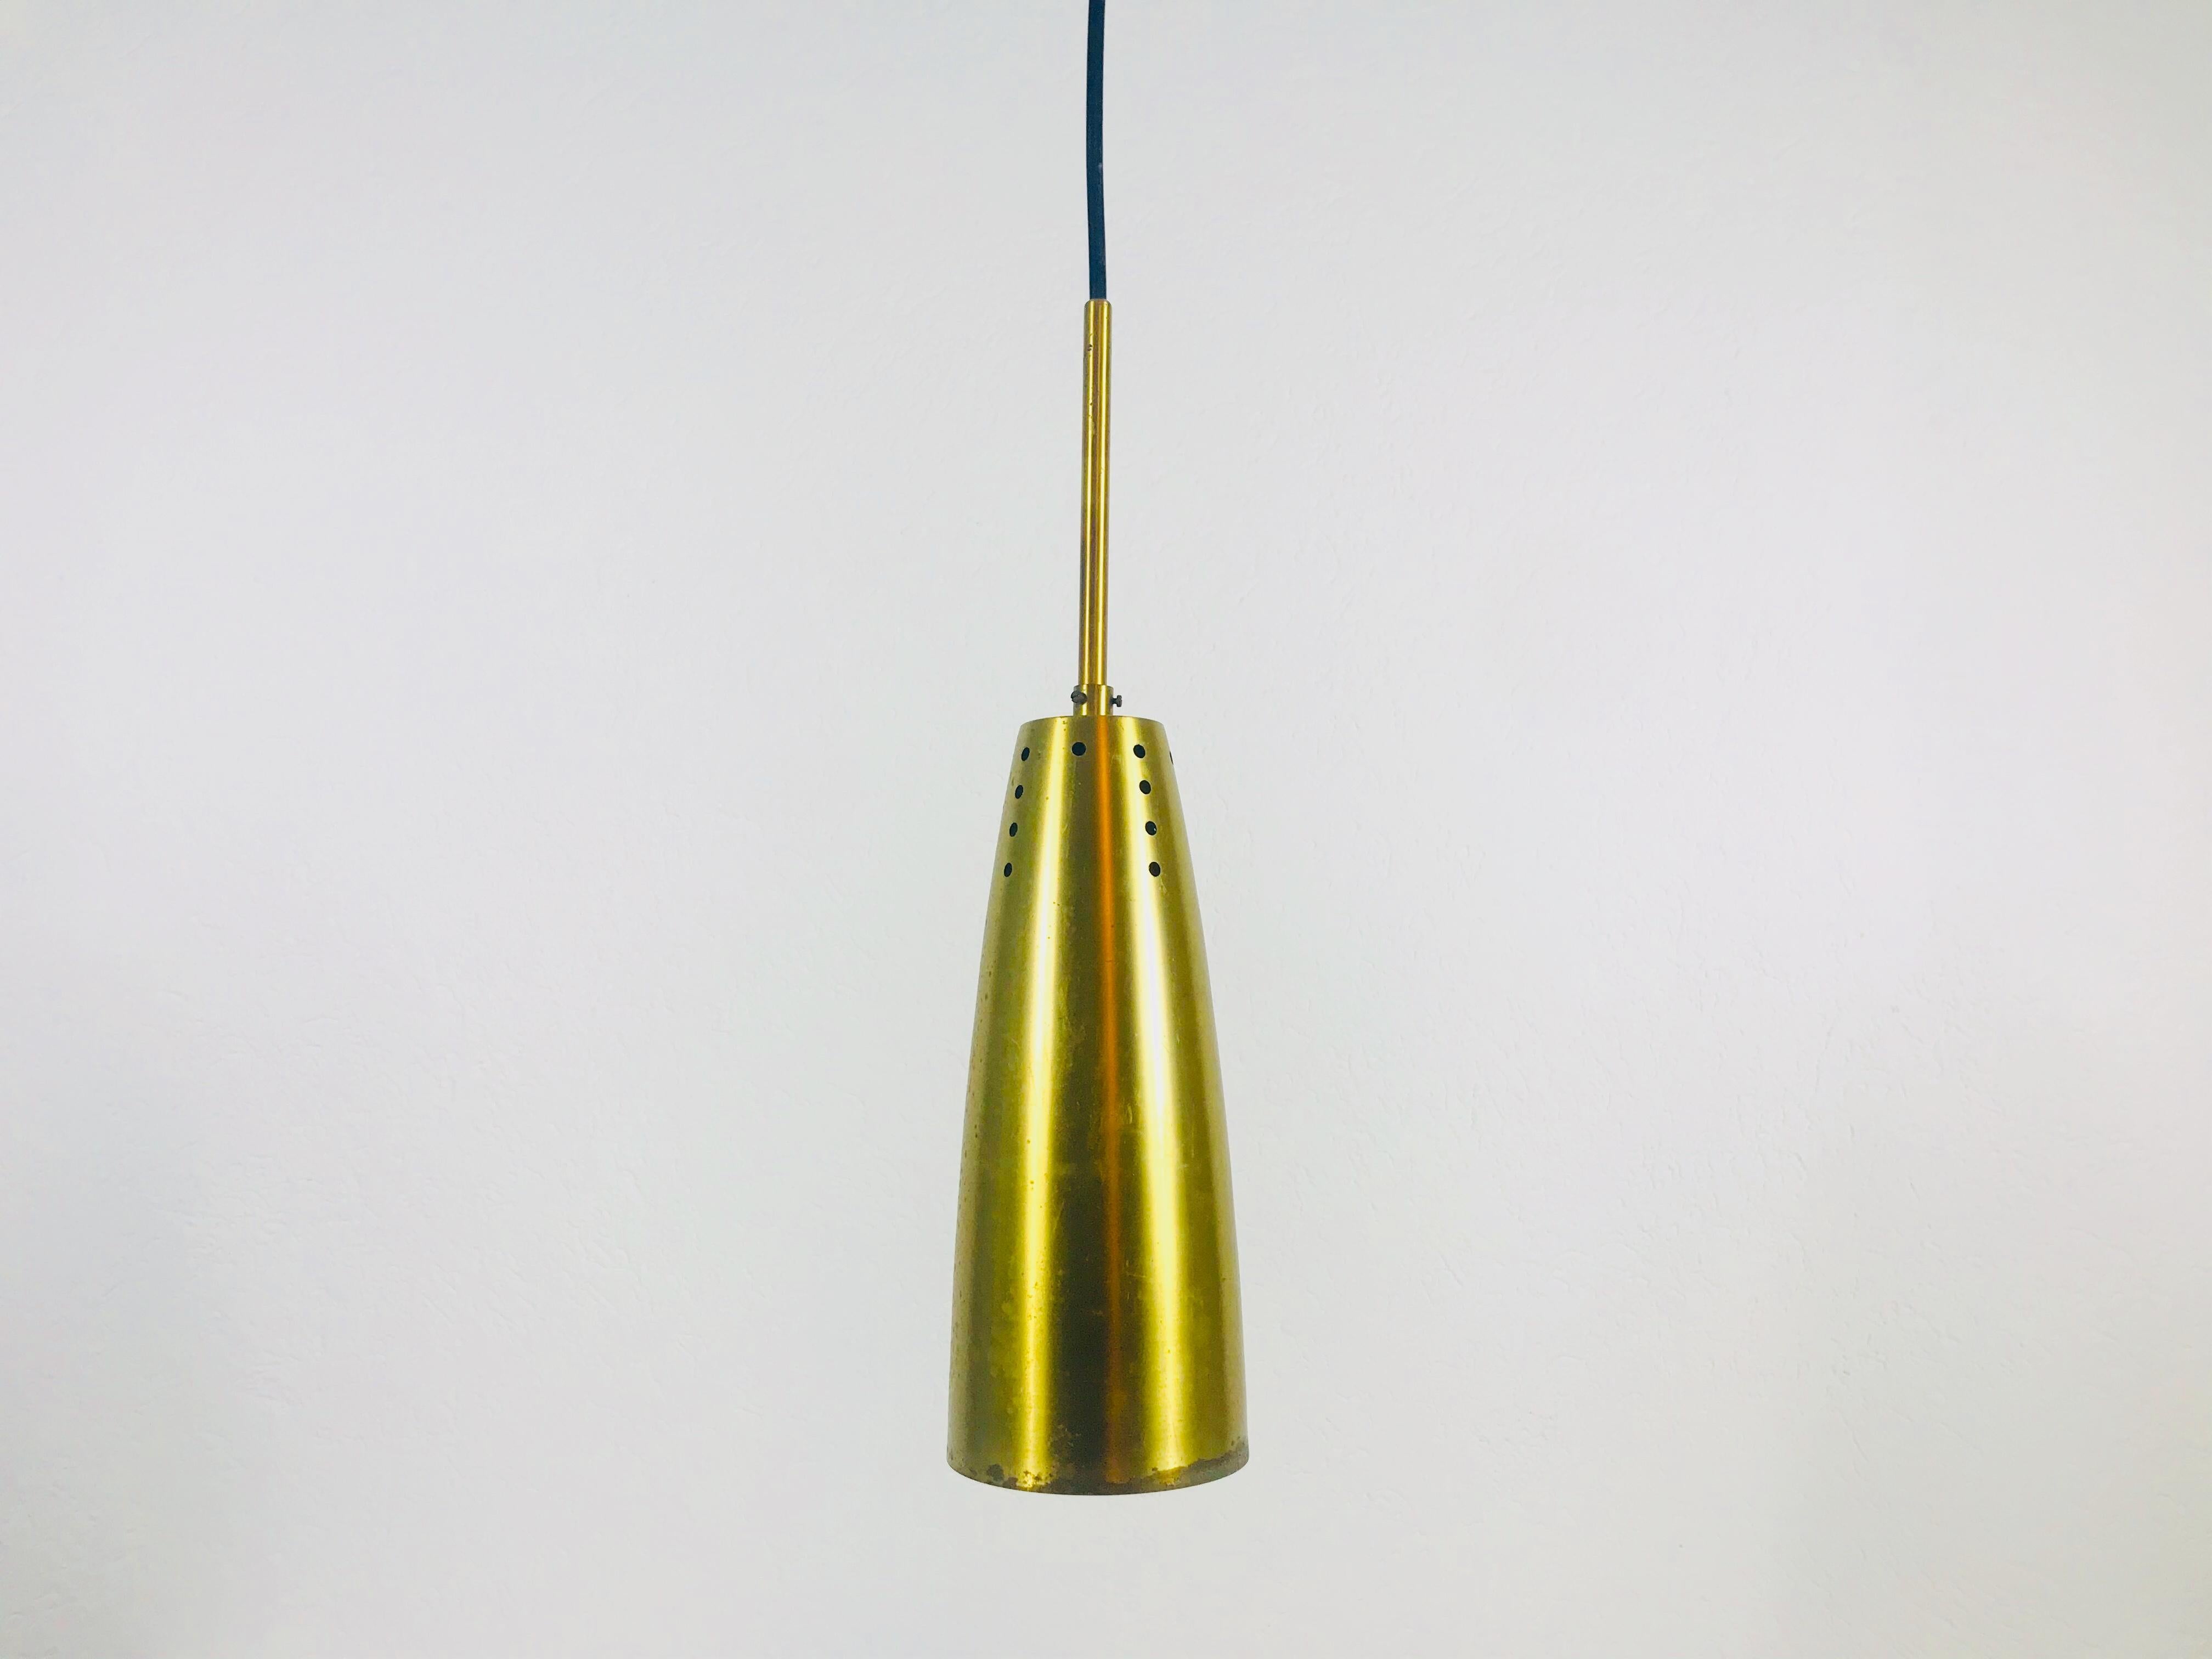 Pair of Full Brass Mid-Century Modern Pendant Lamps, 1950s, Germany For Sale 6